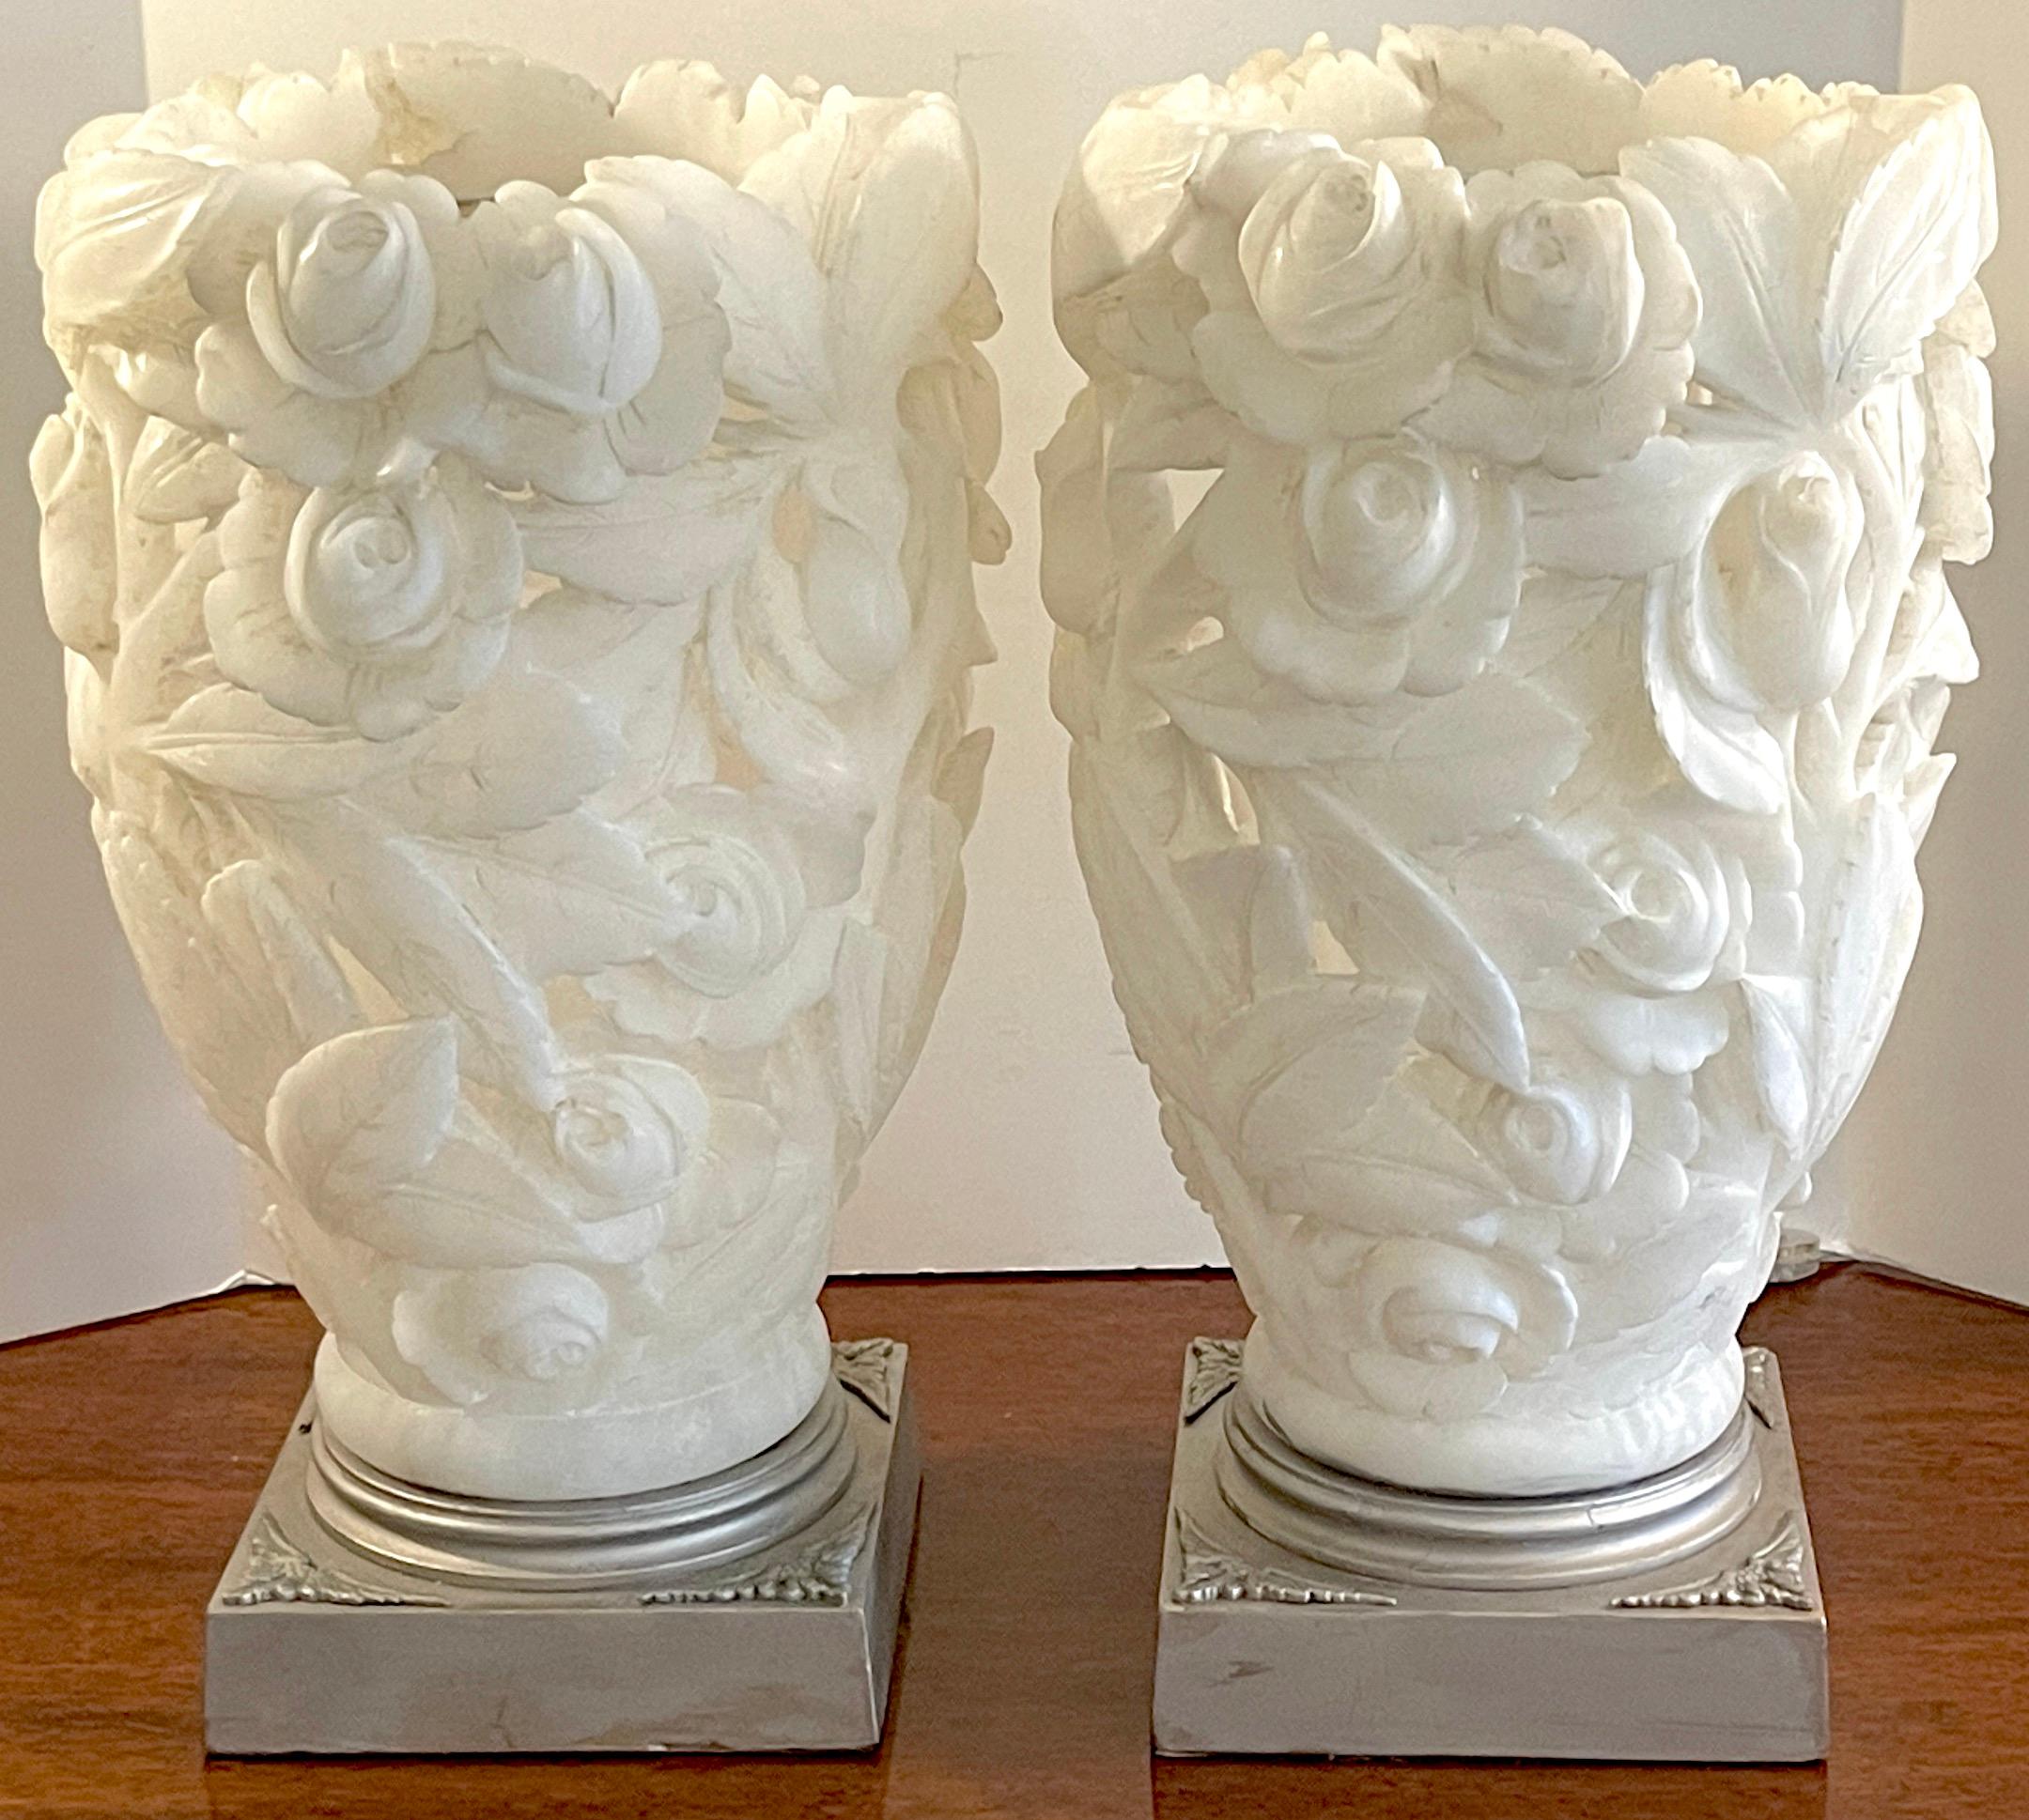 Pair of 1950s Italian carved Alabaster Rose Motif torchere lamps 
Each one fantastically hand-carved in pierced relief, raised on 8-inch square silver-leaf pedestal base. Unsigned.
Shown when light in the photos with a dimmer, numerous options for